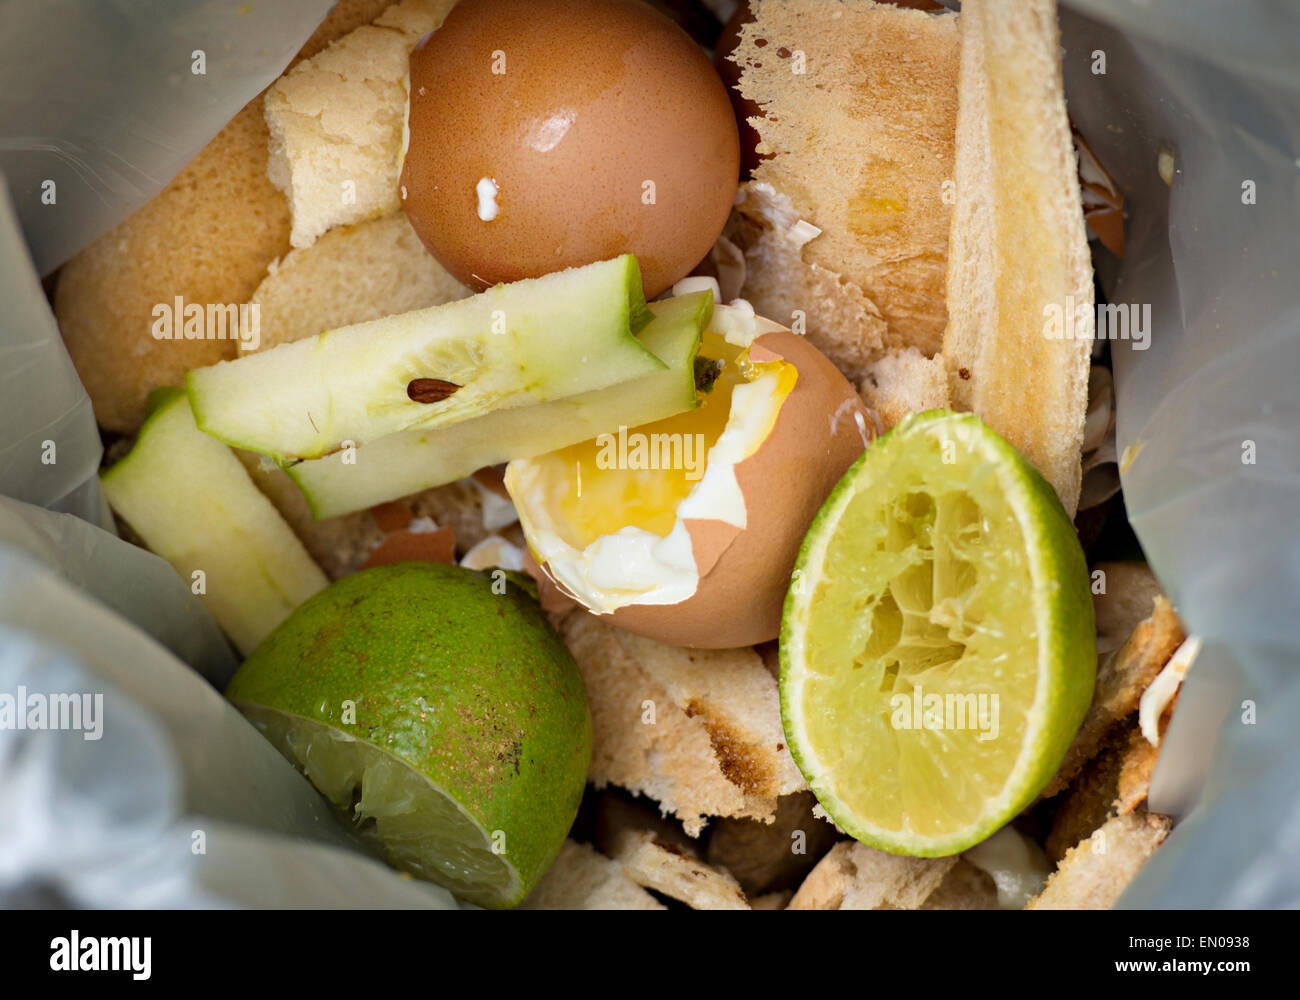 Contents of a food waste caddy Stock Photo